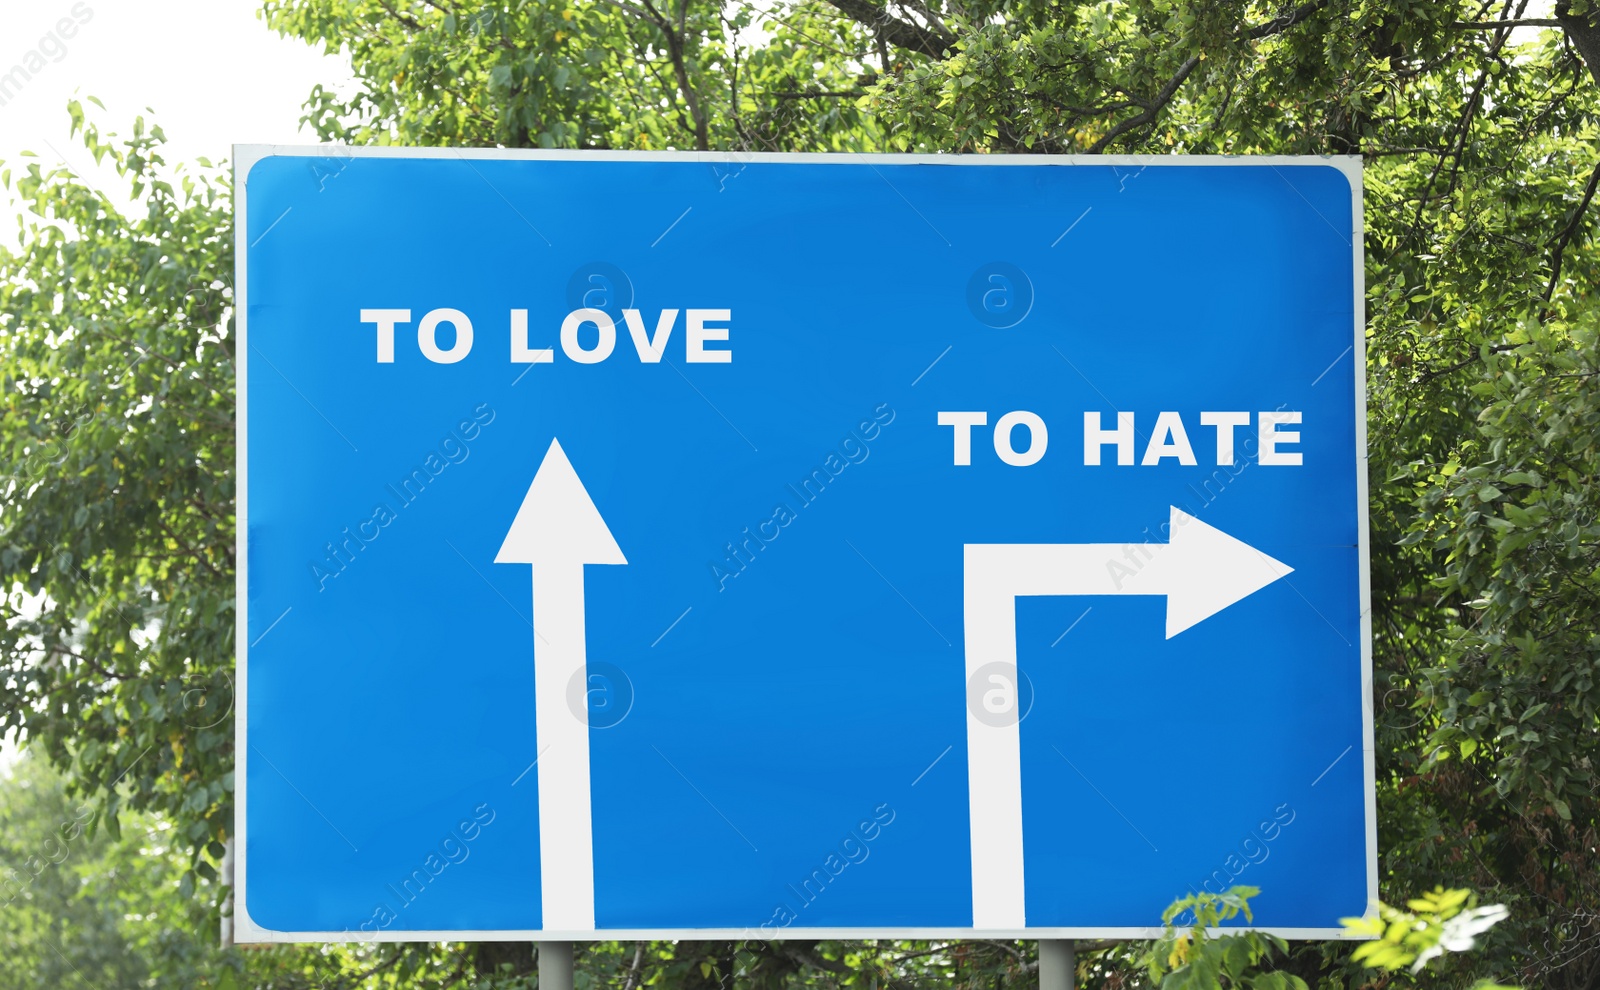 Image of Road sign with different directions - TO HATE or TO LOVE outdoors